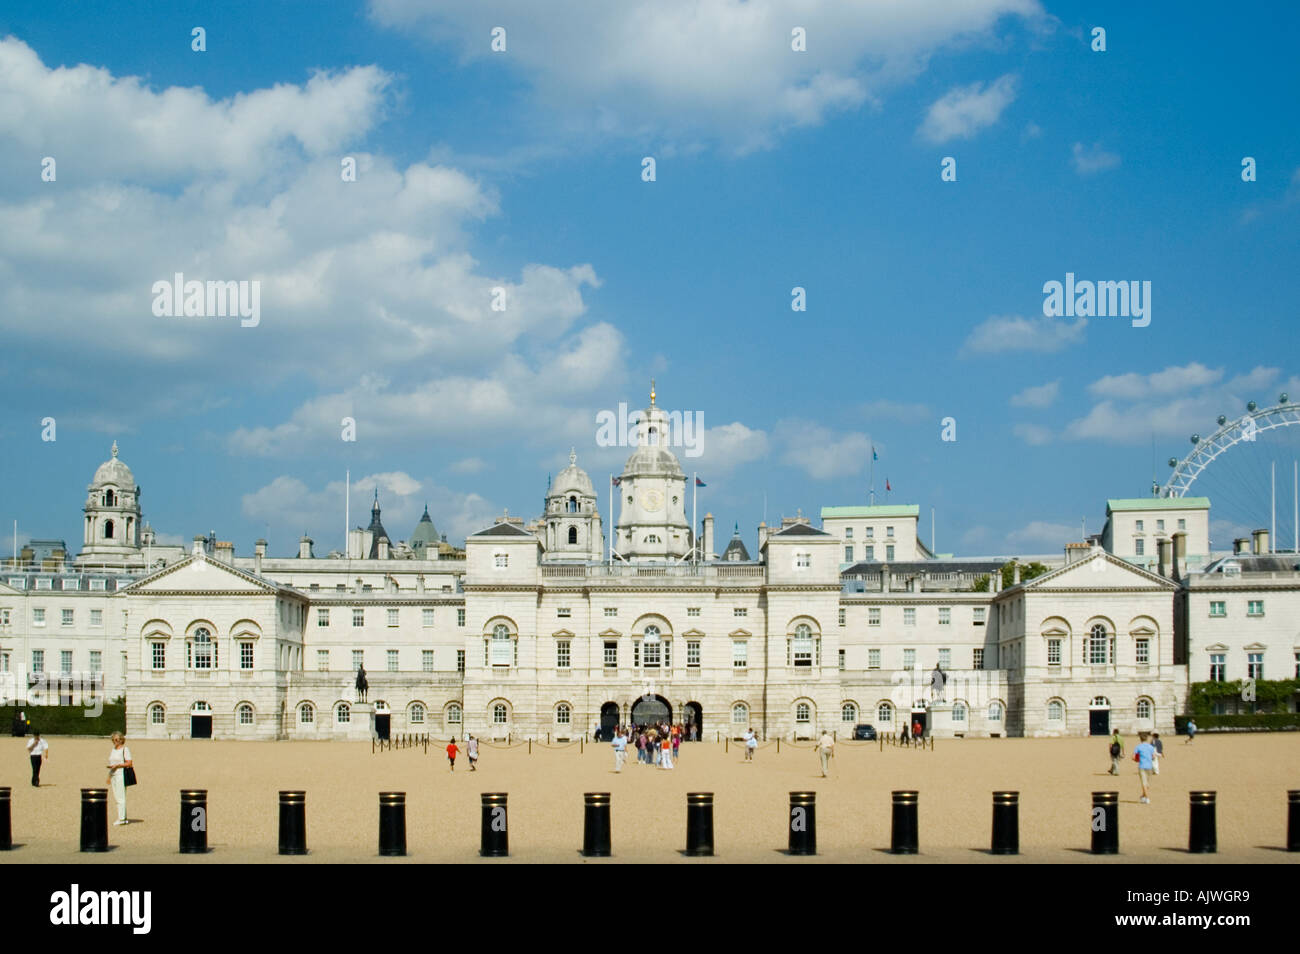 Horizontal wide angle view of Horse Guards Parade against a blue sky on a sunny day. Stock Photo